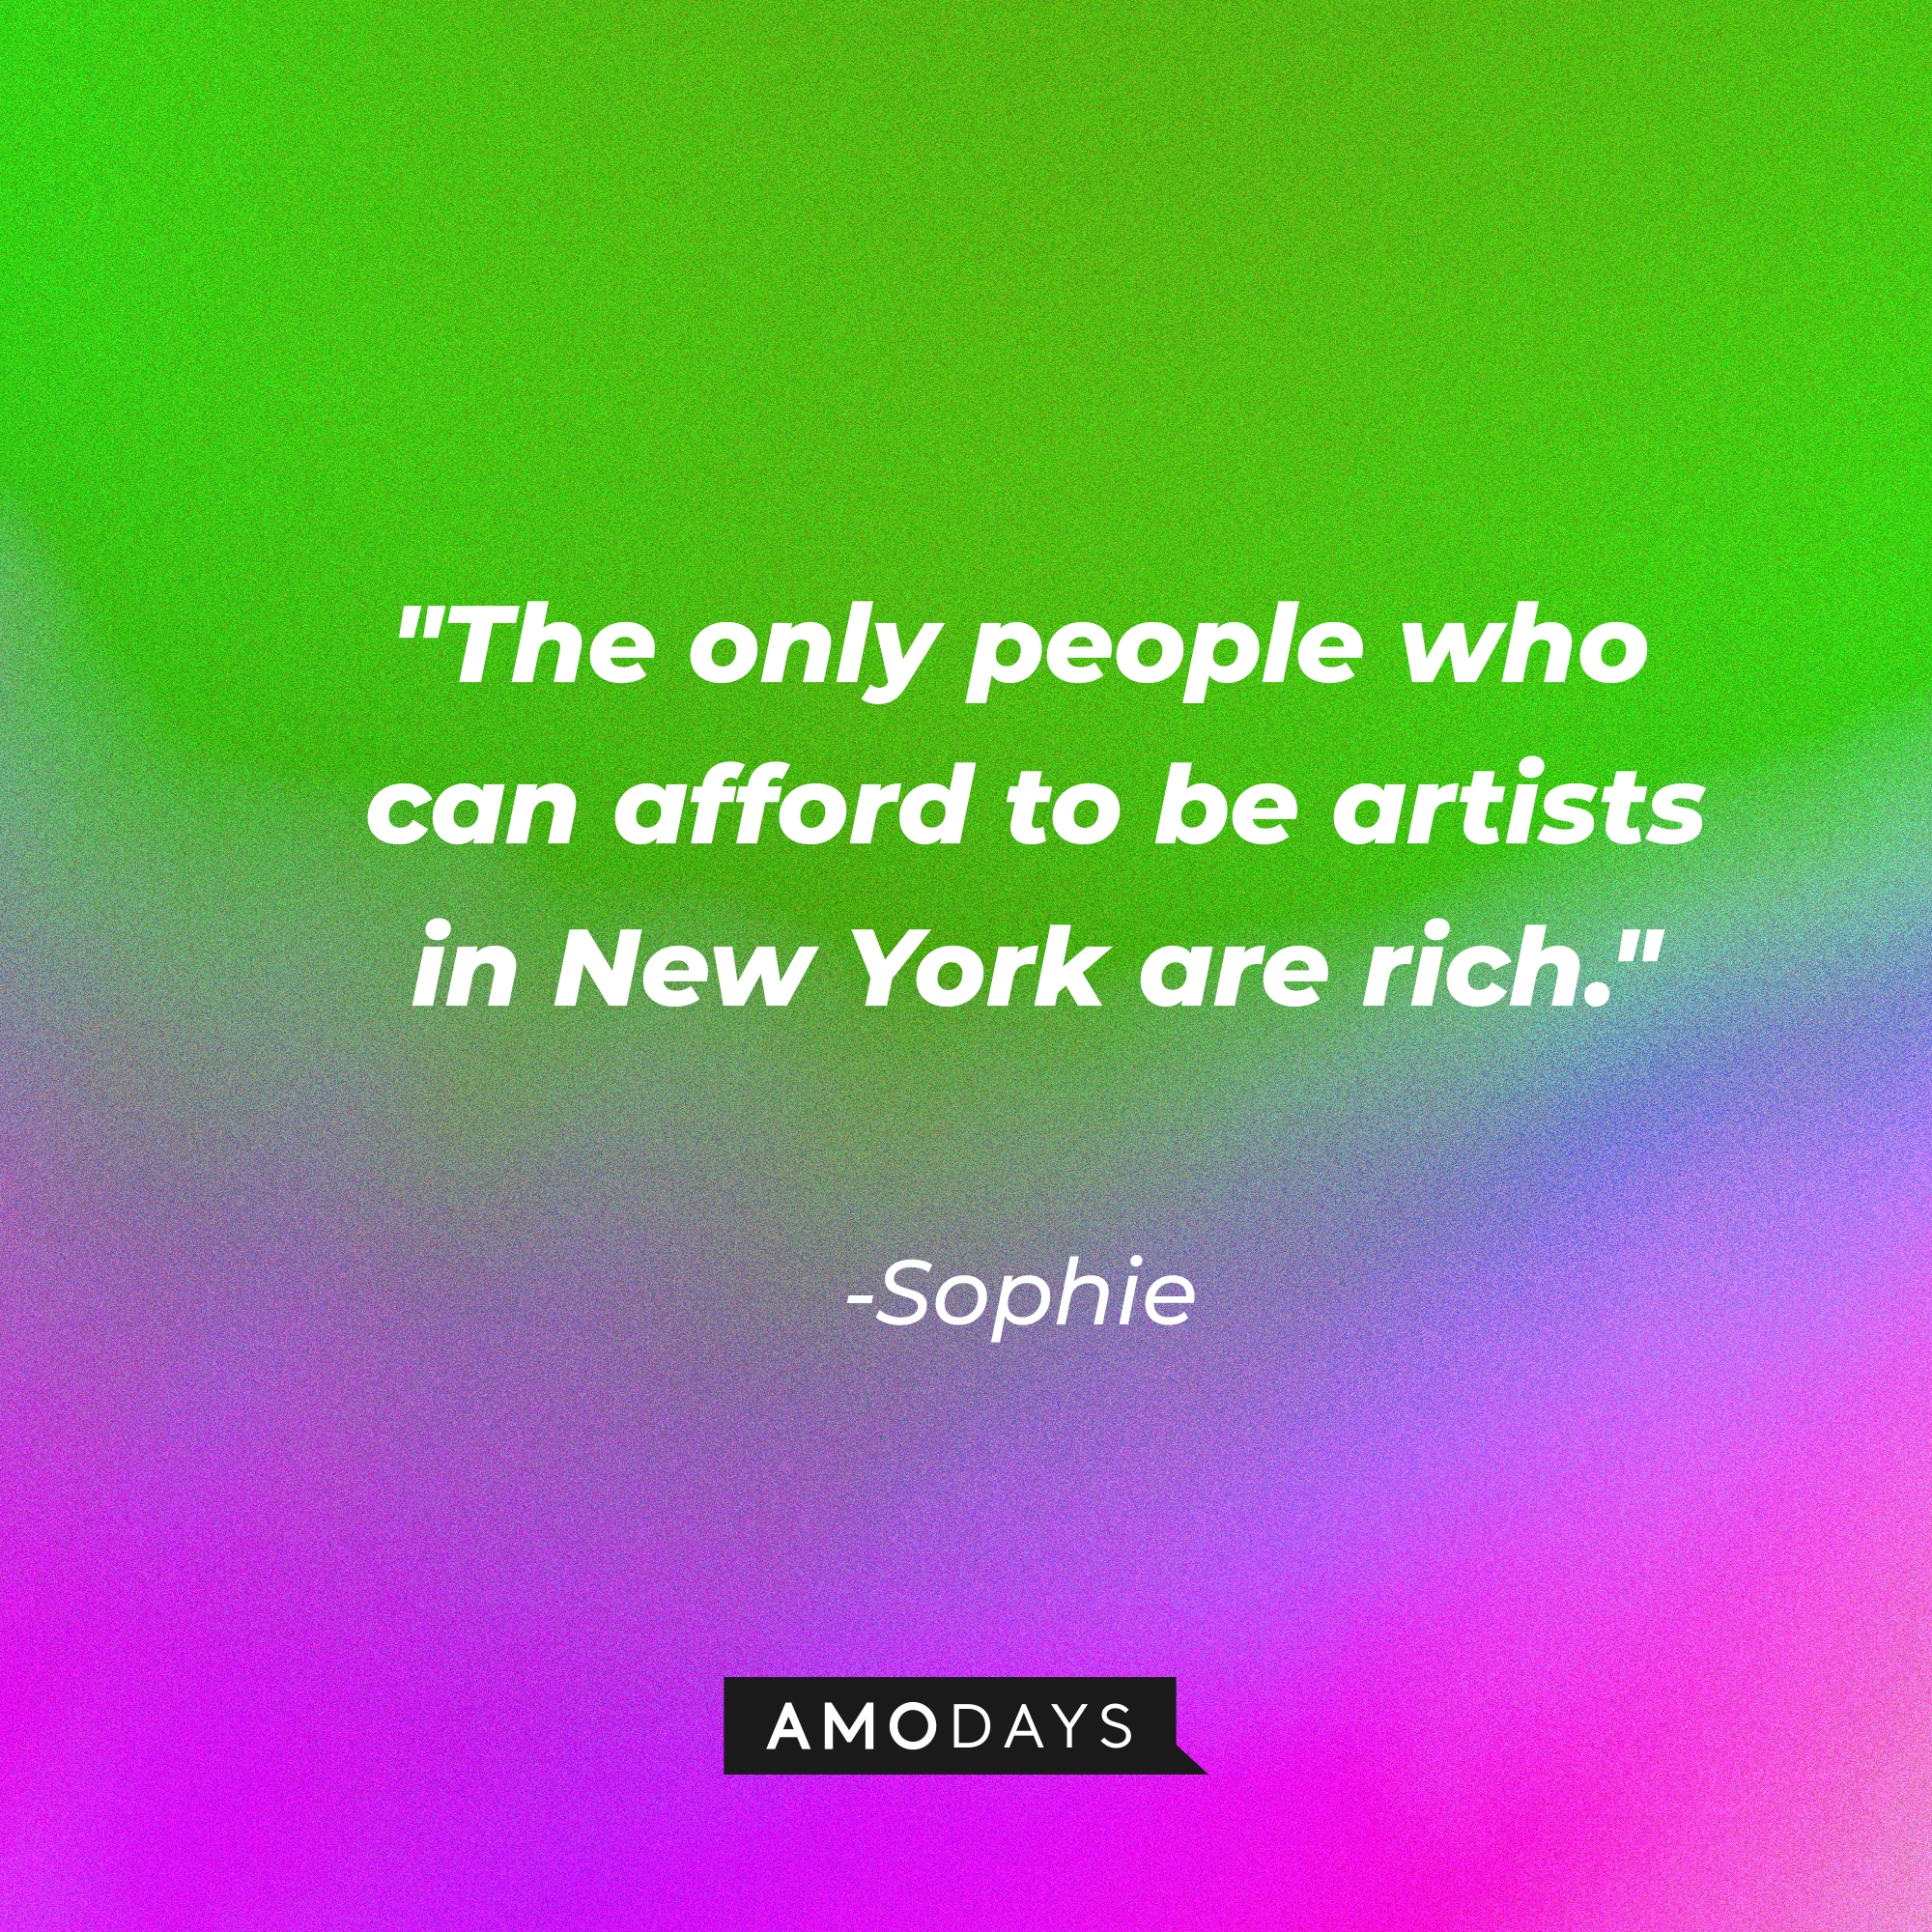 Frances' quote: "The only people who can afford to be artists in New York are rich." | Source: AmoDays